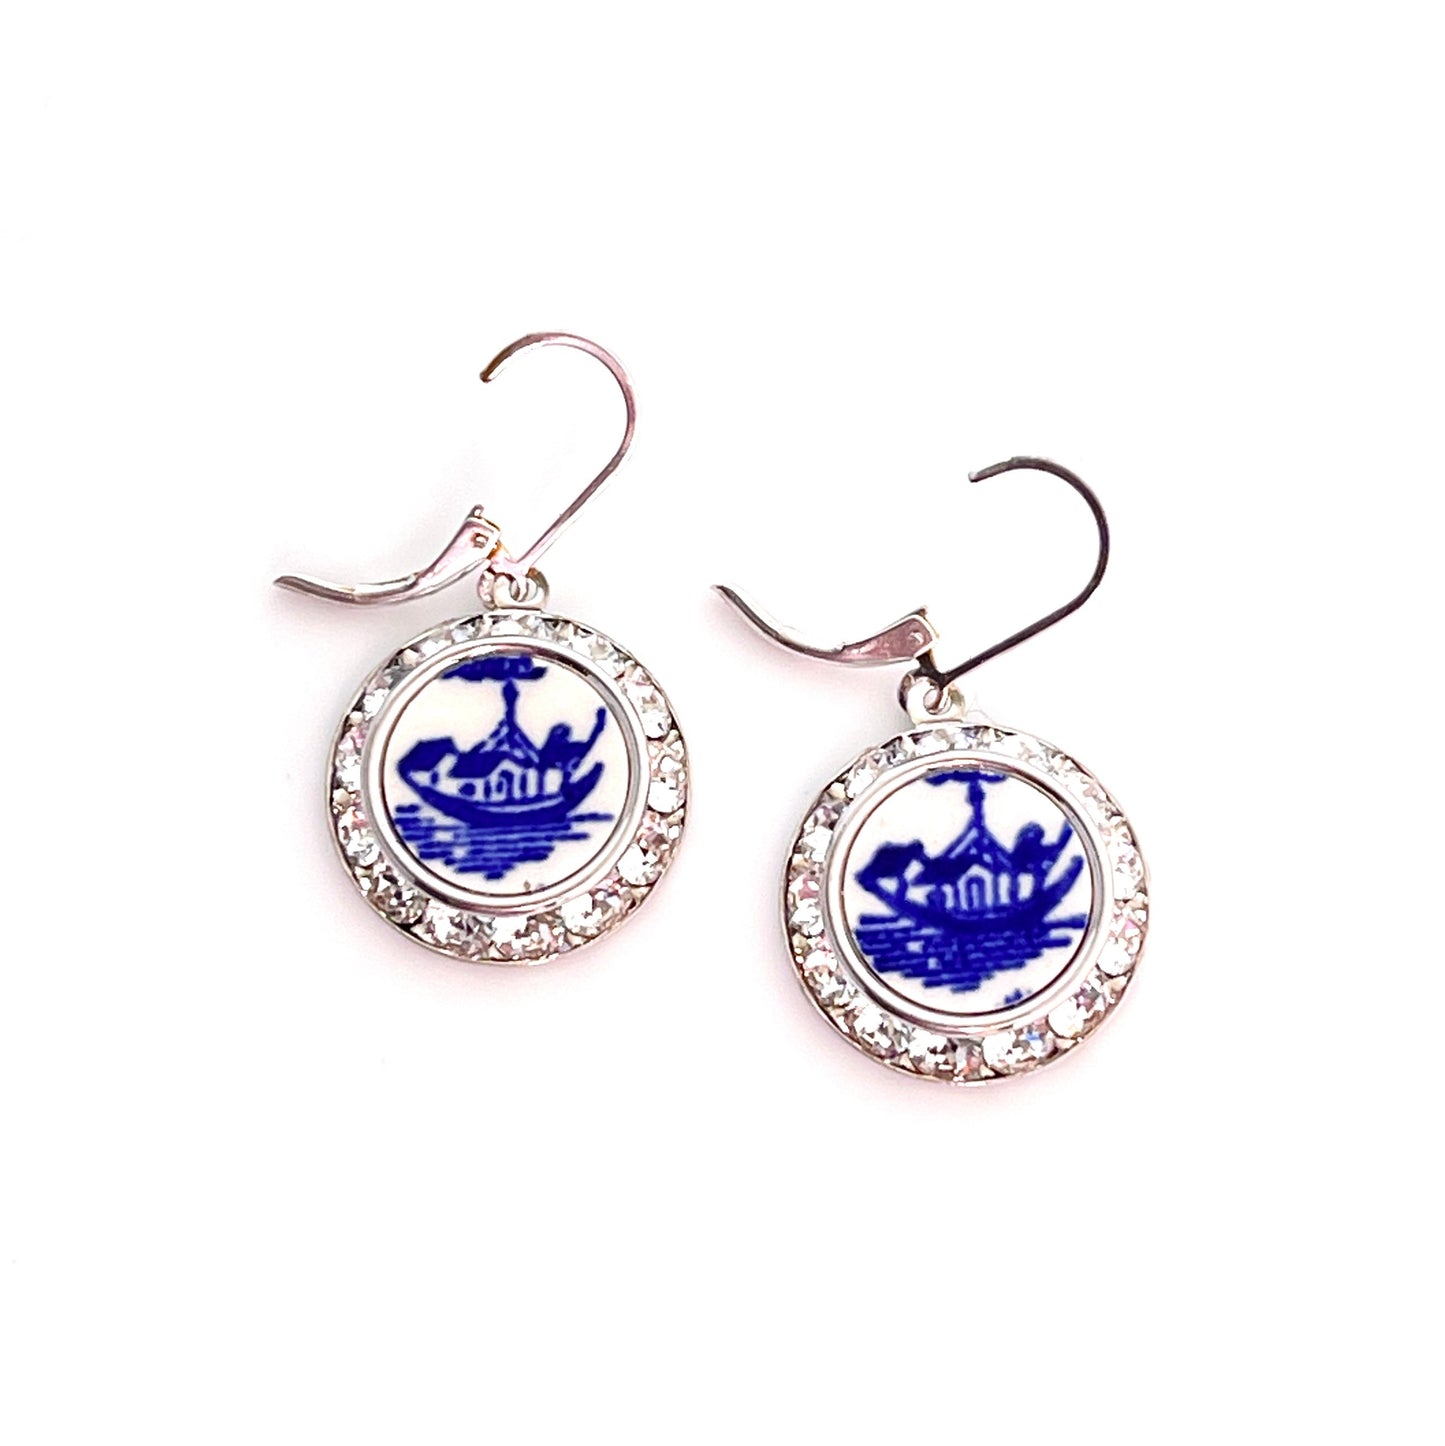 Vintage Blue Willow Ware China Earrings, Nautical Boat Jewelry, Broken China Jewelry, Statement Crystal Earrings, Unique Gifts for Women